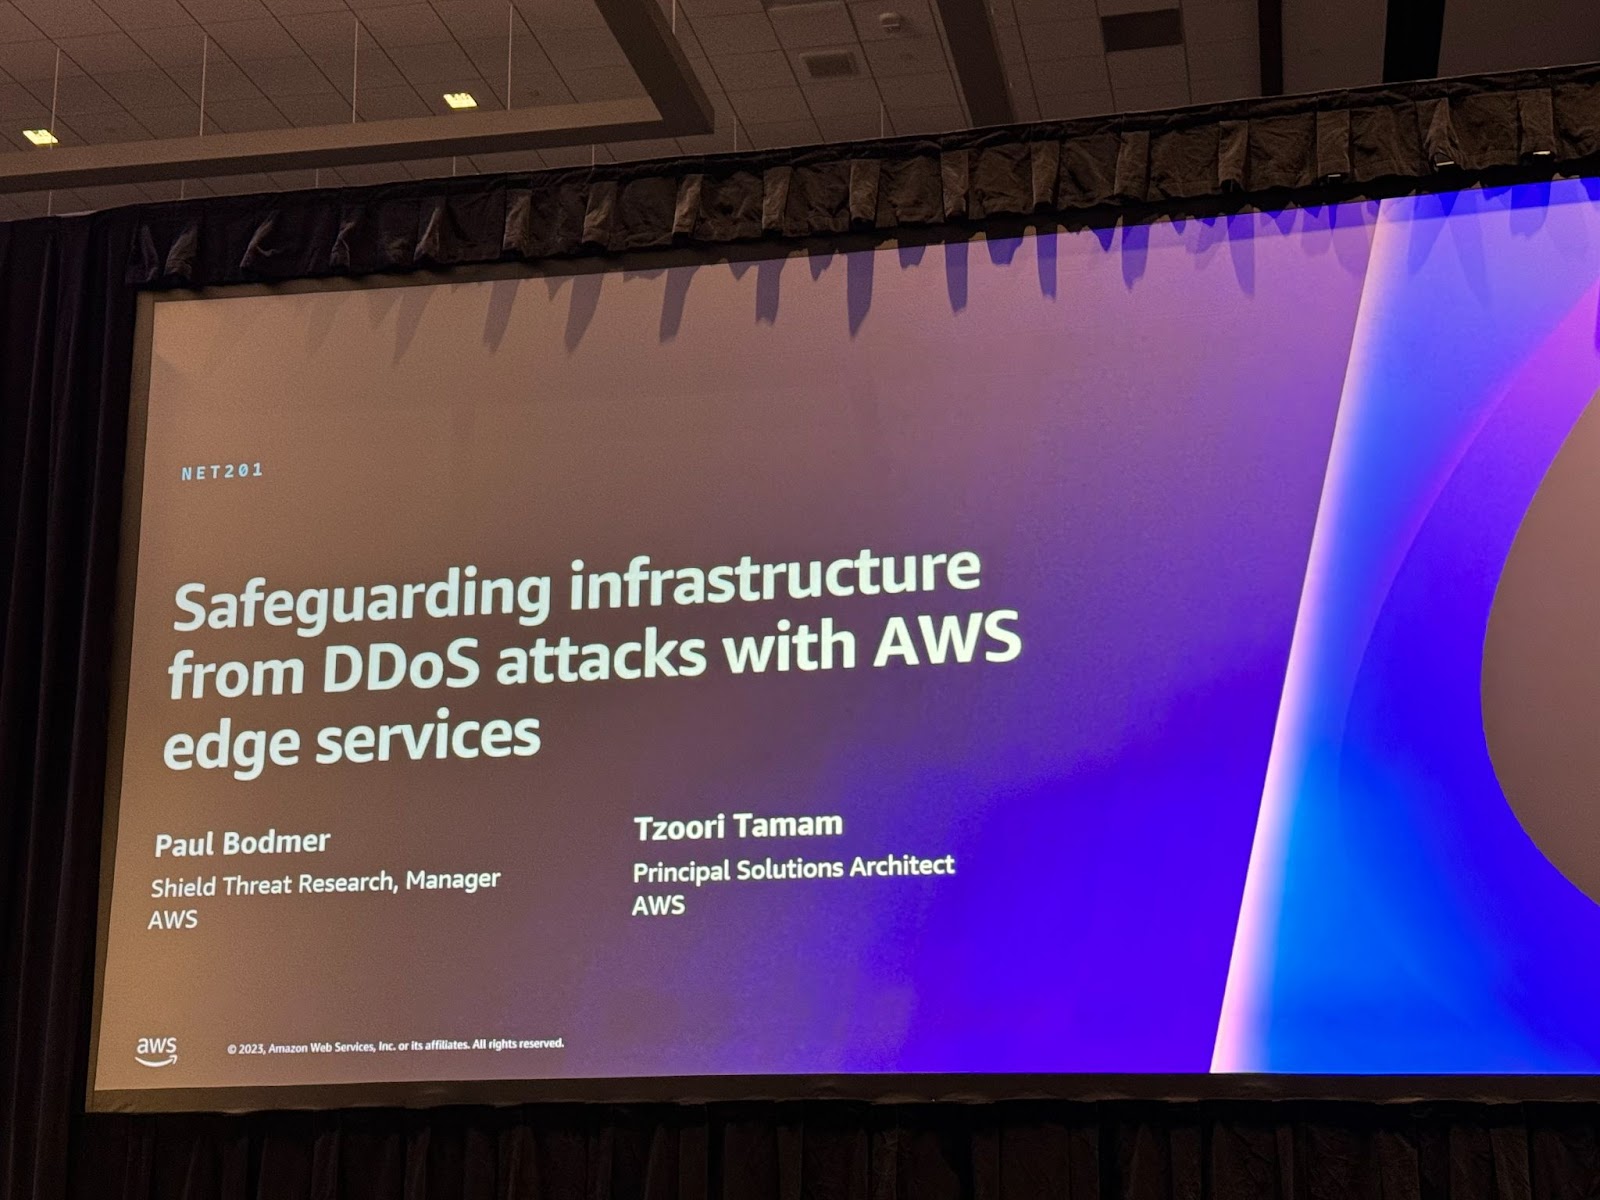 Safeguarding infrastructure from DDoS attacks with AWS edge services